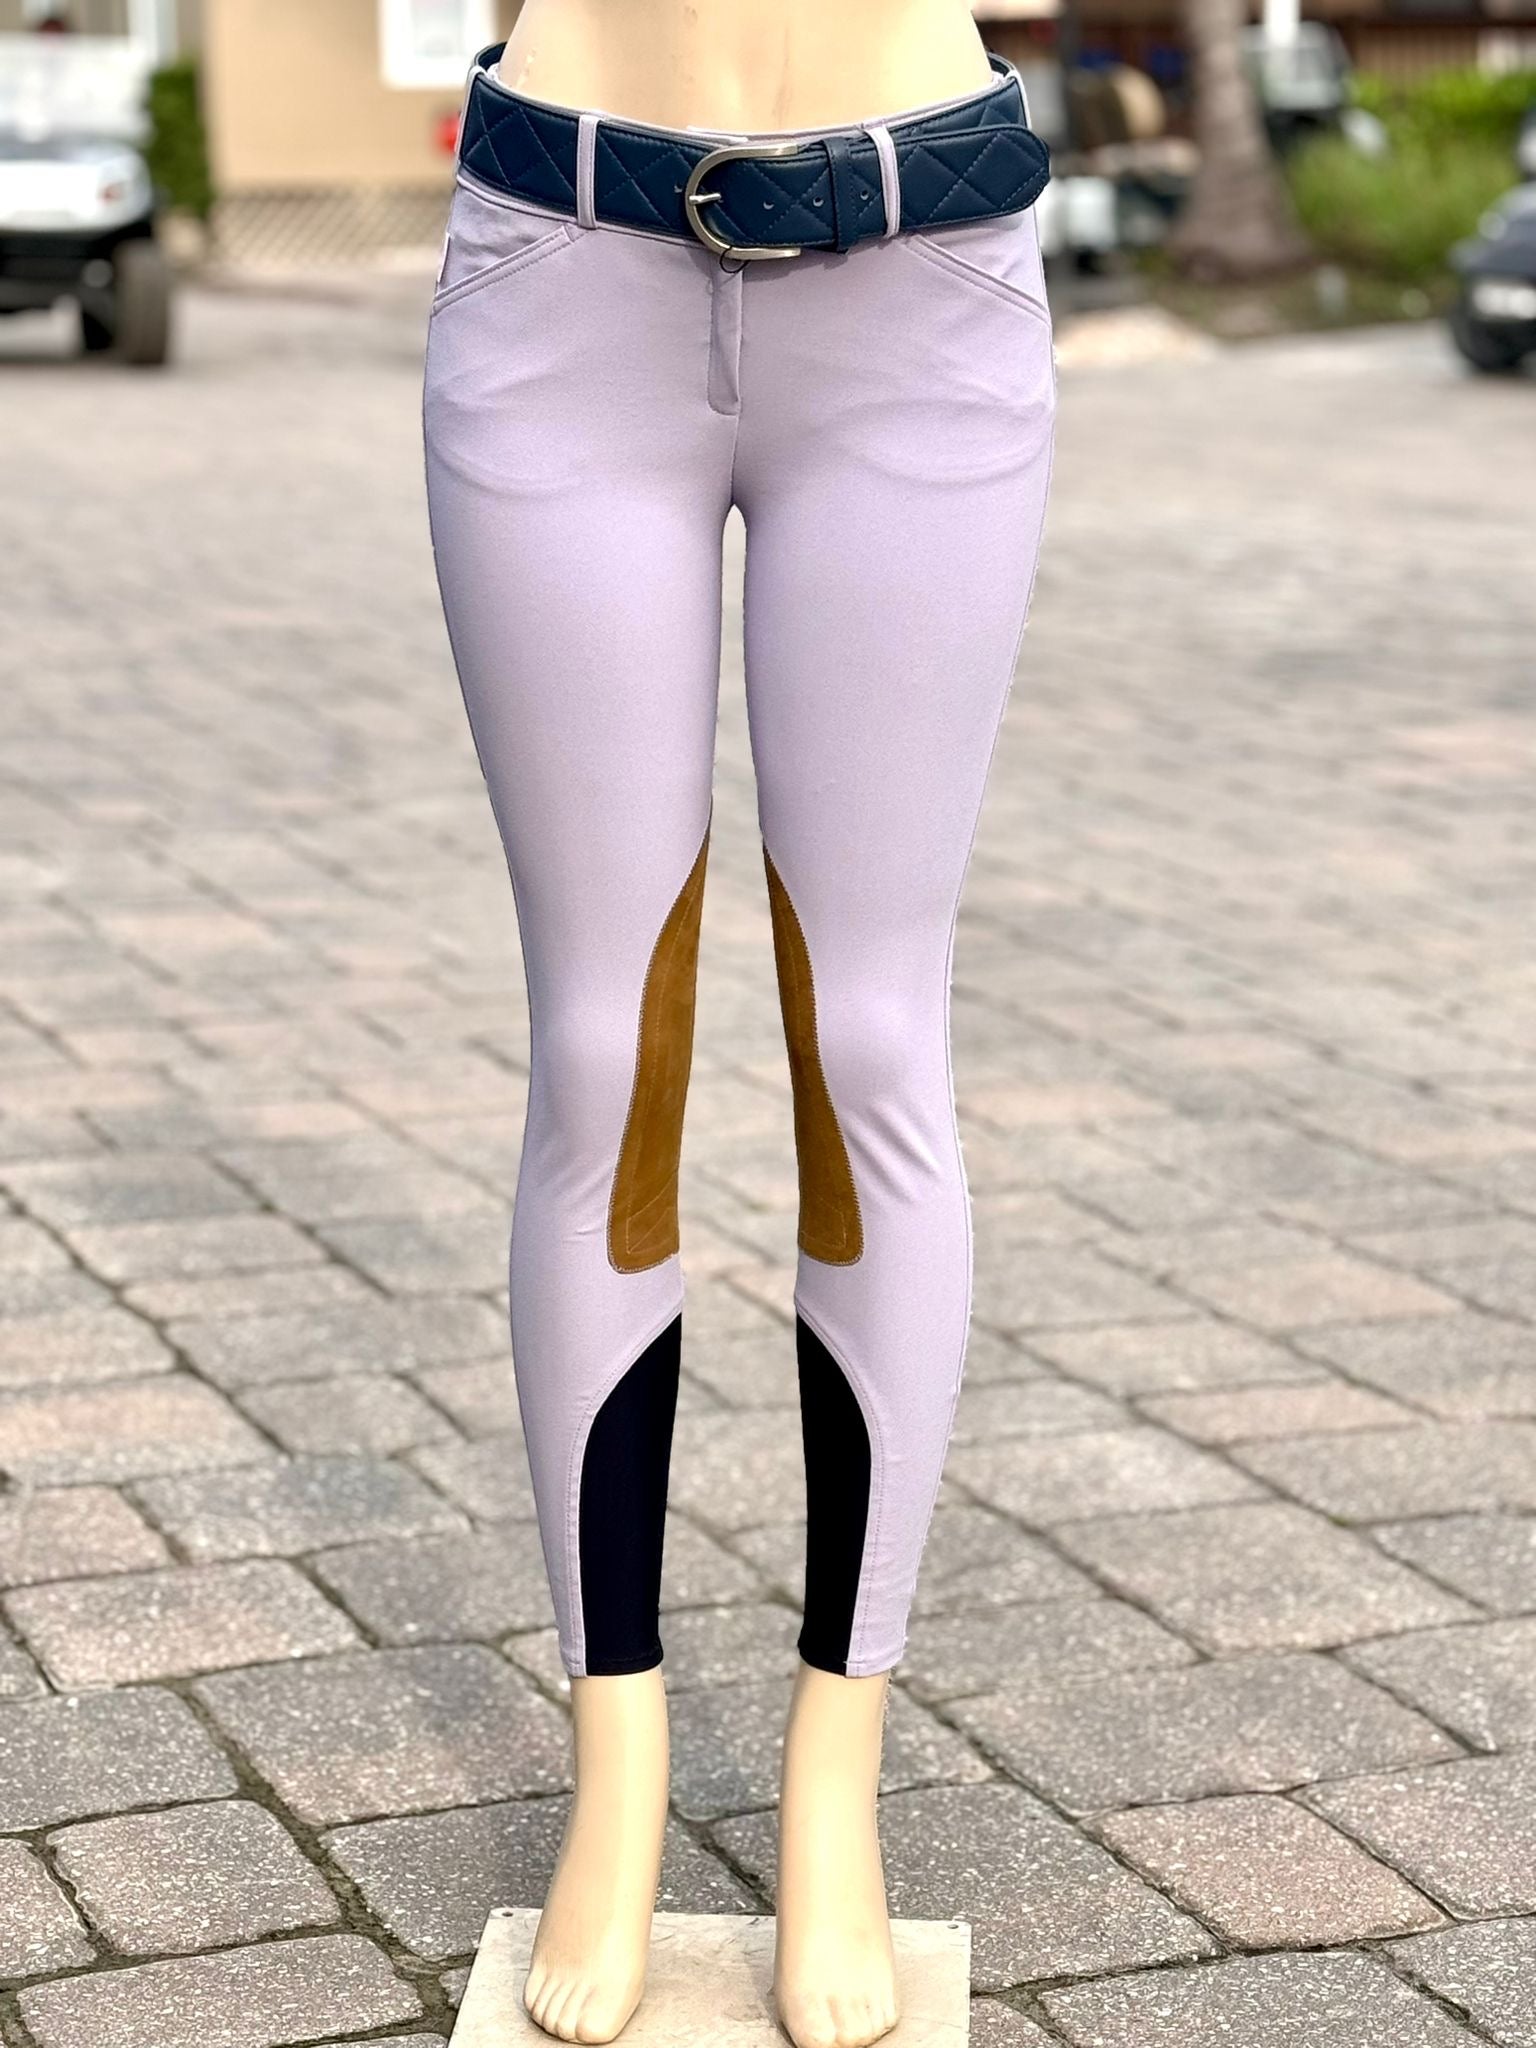 Tailored Sportsman Boot Sock Breeches: Mid Rise, Front Zip Colors Sizes 22-26